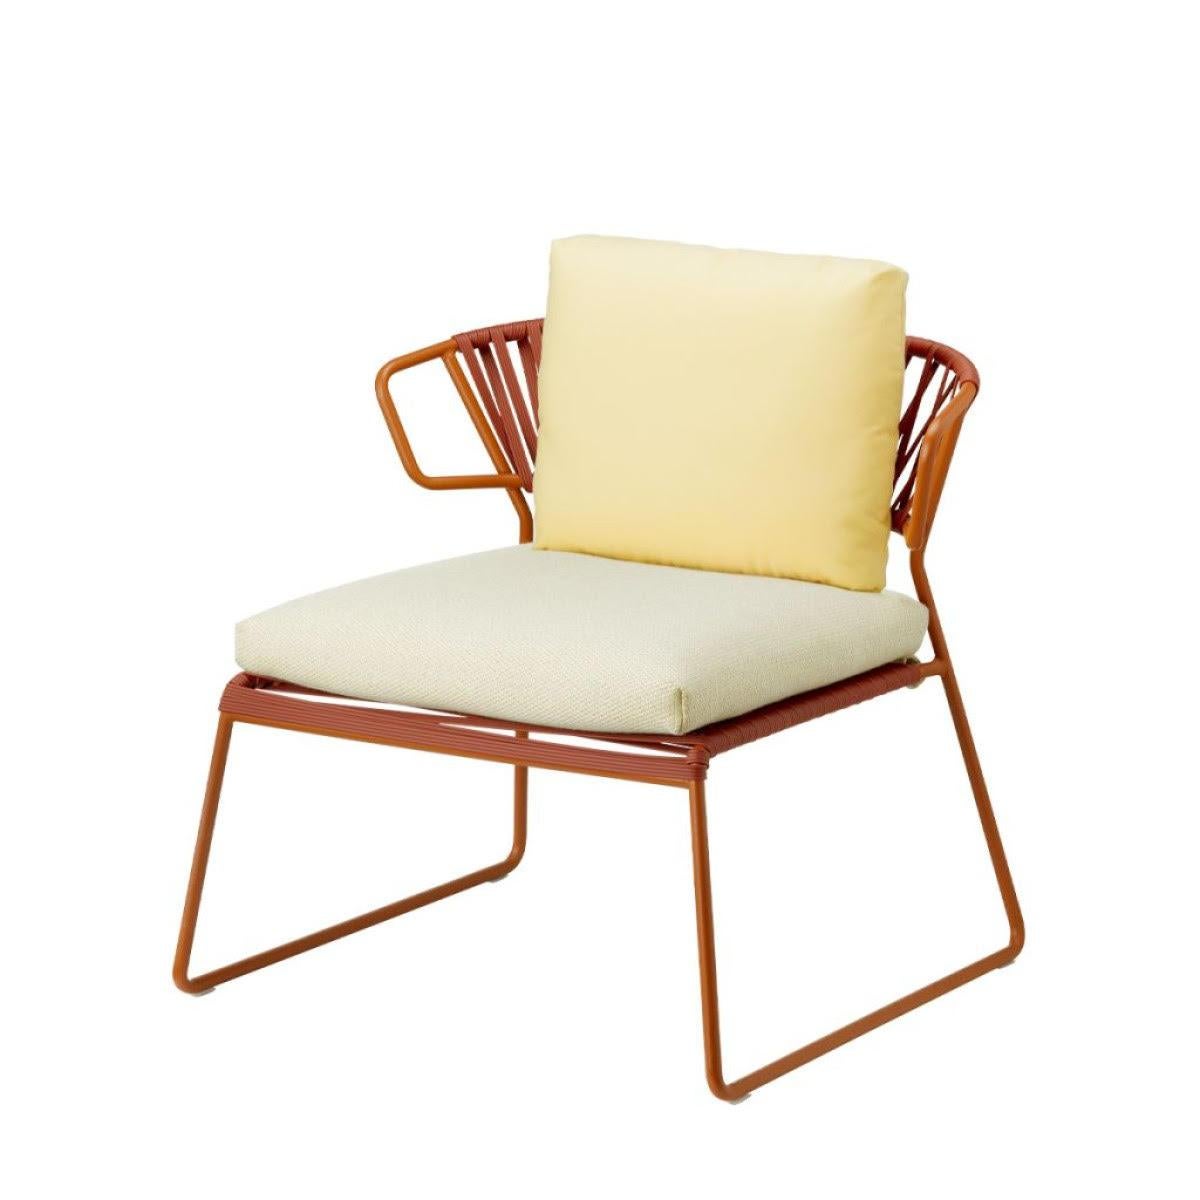 Contemporary Modern Yellow Armchair Outdoor or Indoor in Metal and Ropes, 21 century For Sale